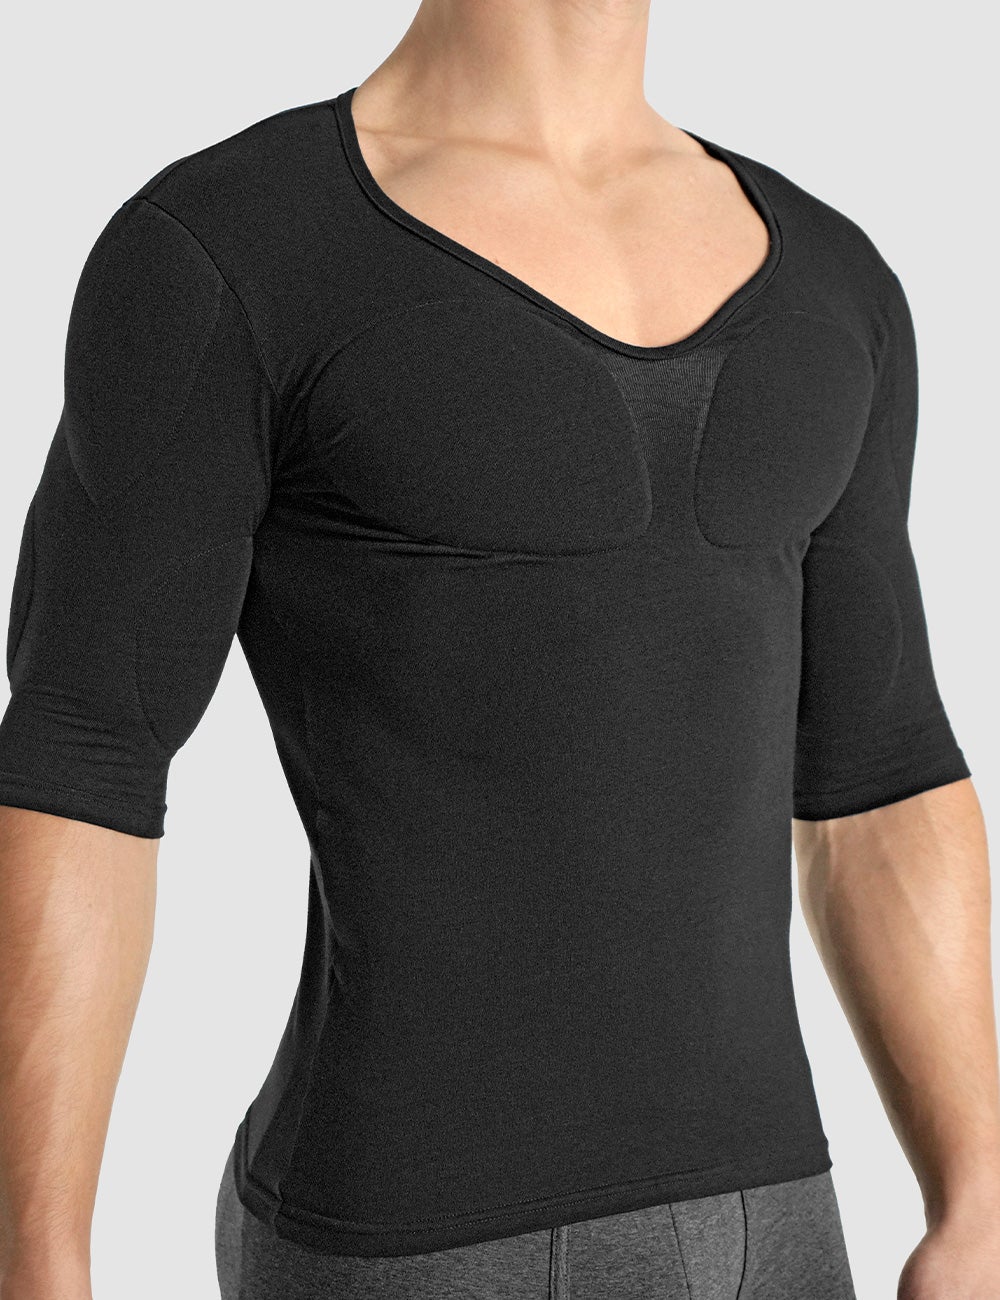 Rounderbum Padded Shaping Muscle T-Shirt RBMS01 